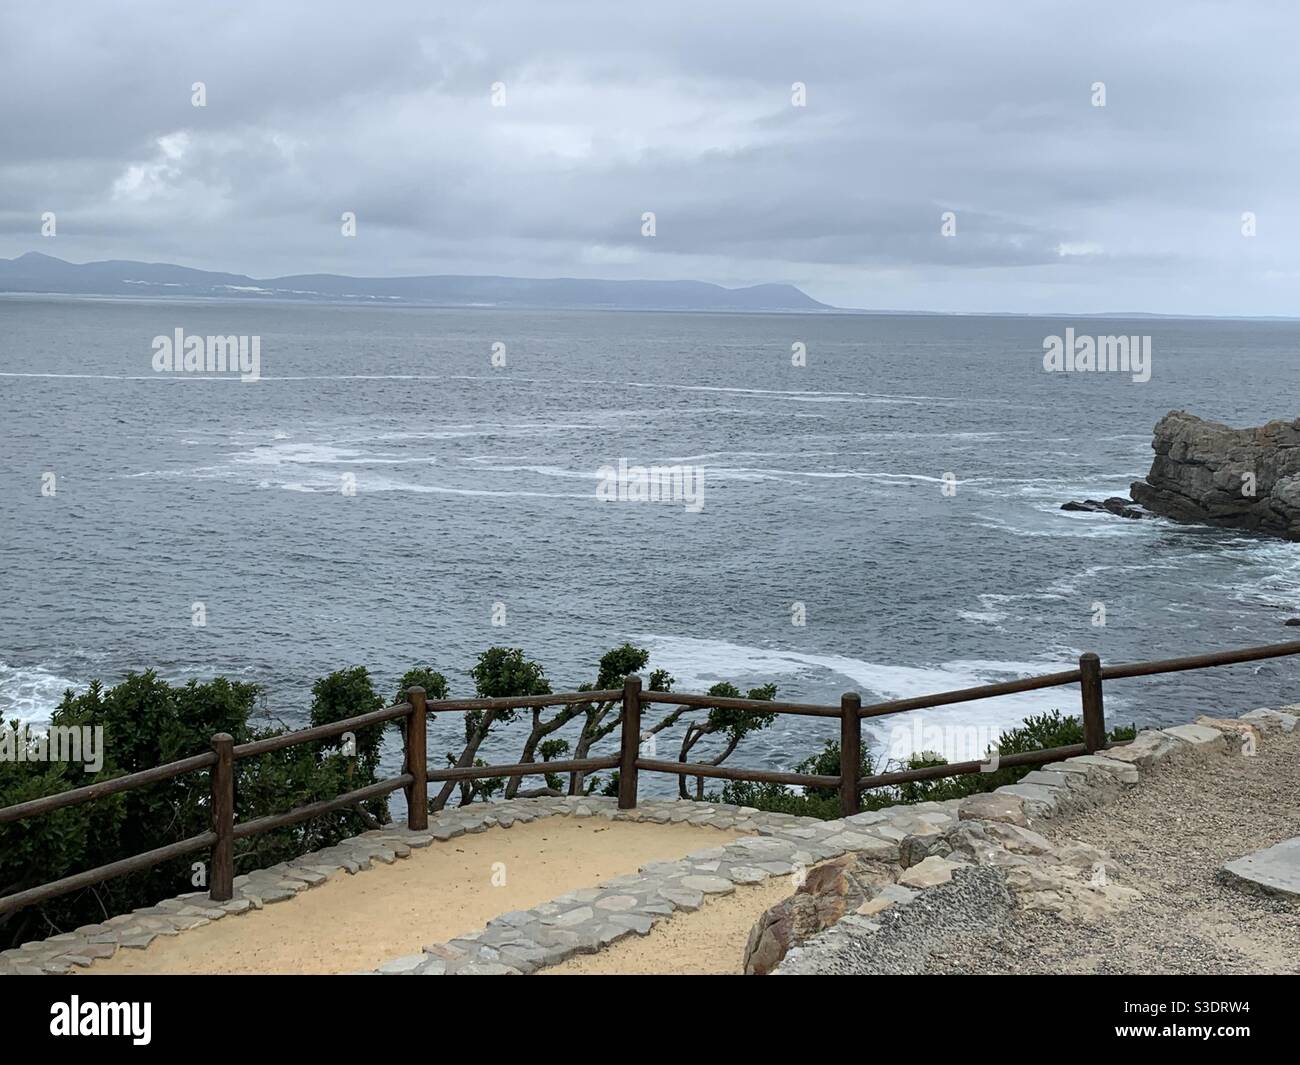 Looking from the shoreline walk in Hermanus across the bay towards Gansbaai. On the near shore we see the walkway, railing and scrub brush above the sea foam. Stock Photo